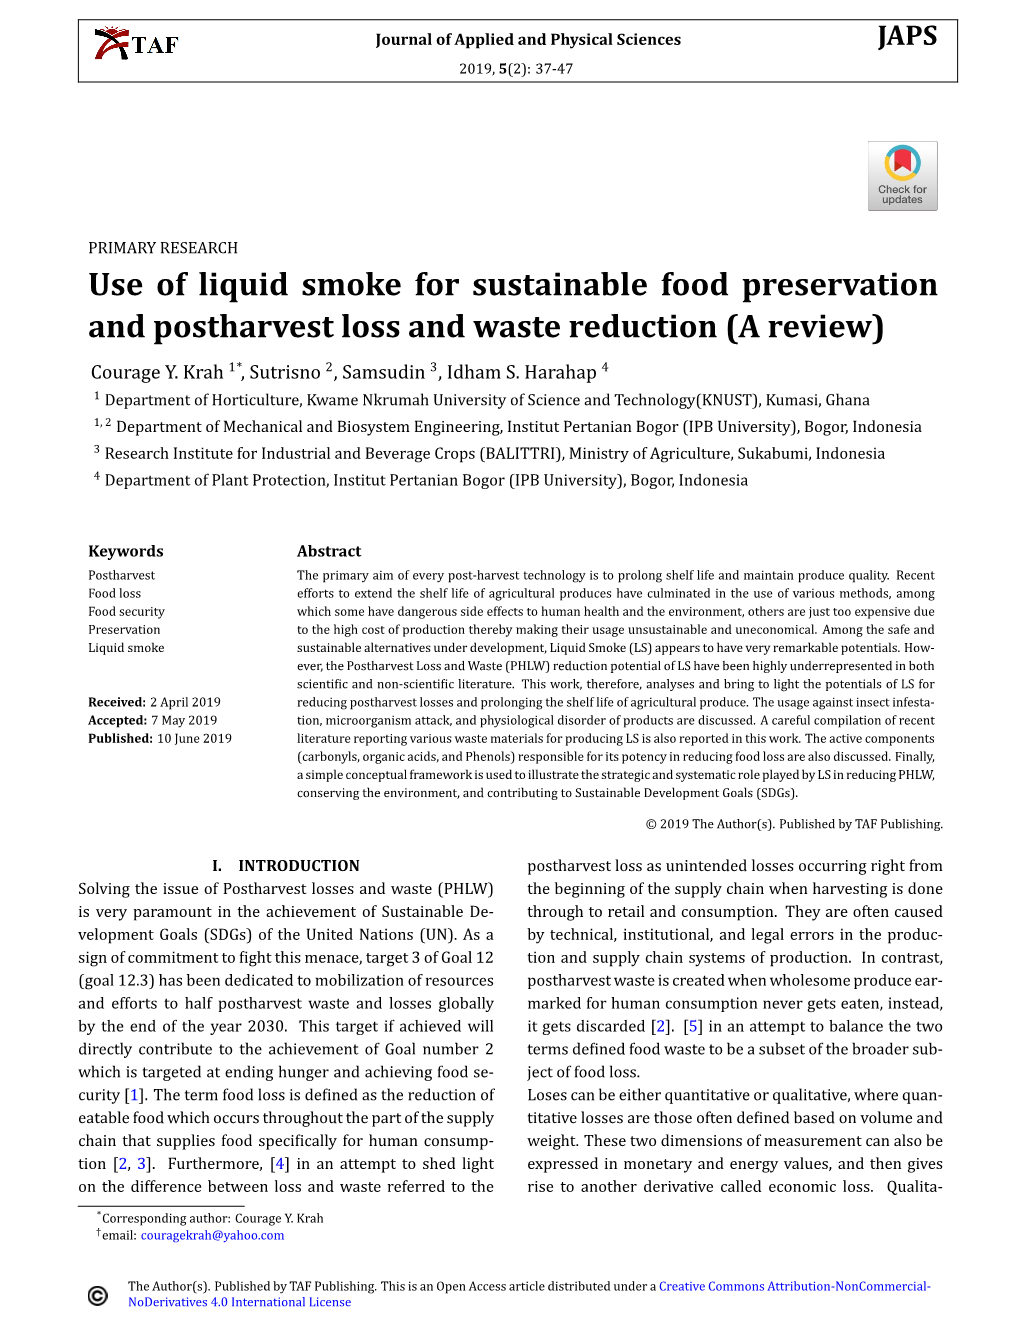 Use of Liquid Smoke for Sustainable Food Preservation and Postharvest Loss and Waste Reduction (A Review) Courage Y